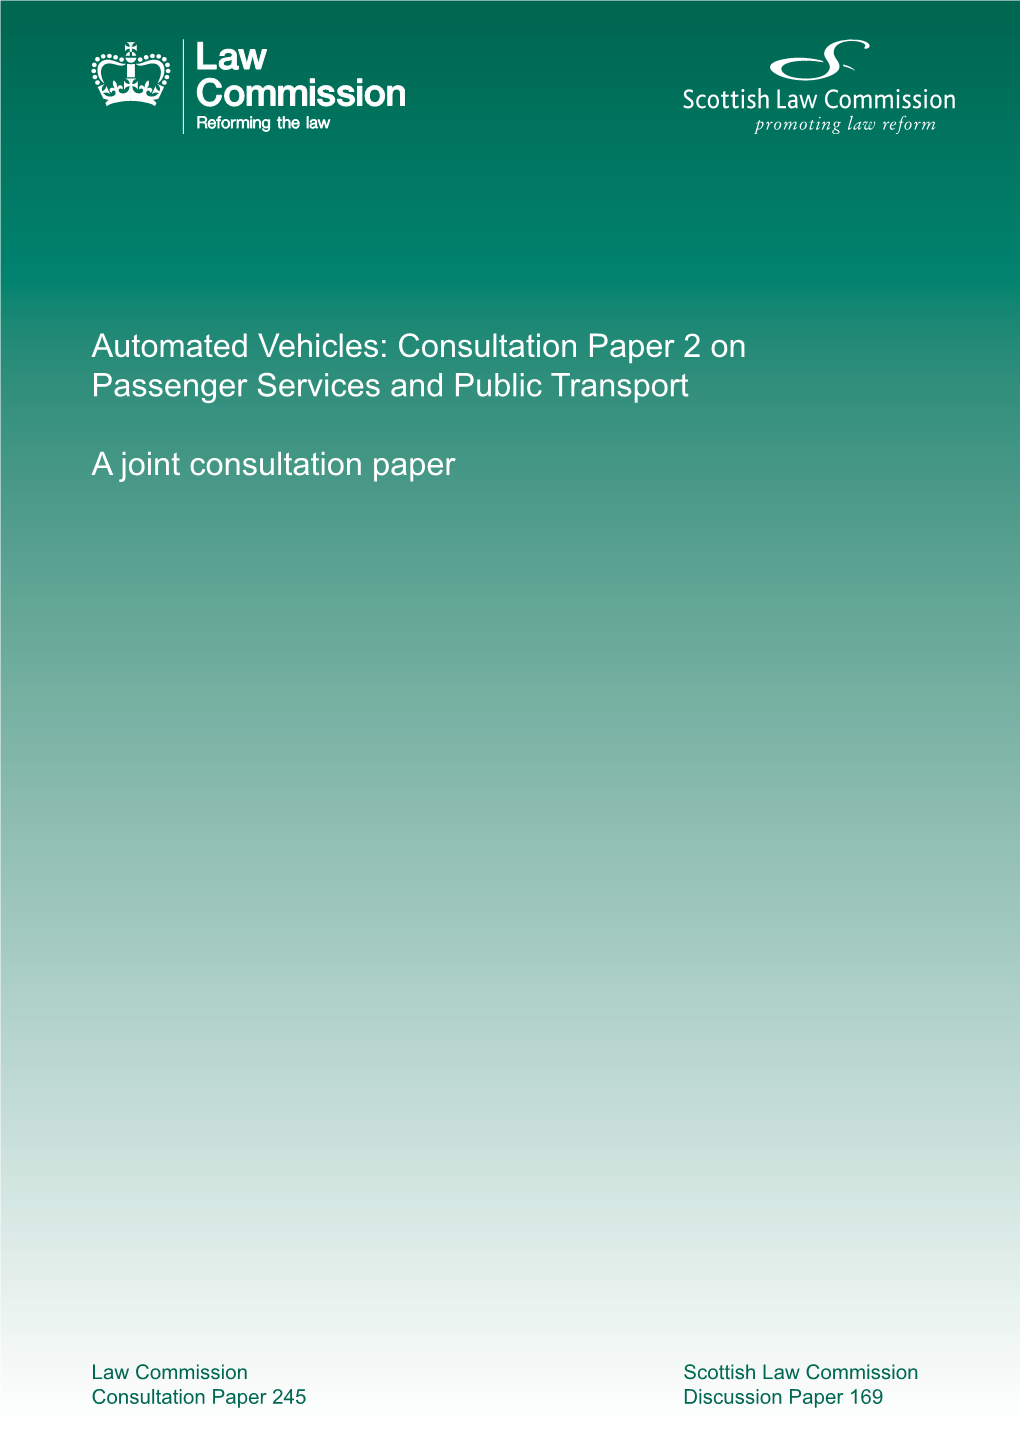 Automated Vehicles Consultation Paper 2 on Passenger Services